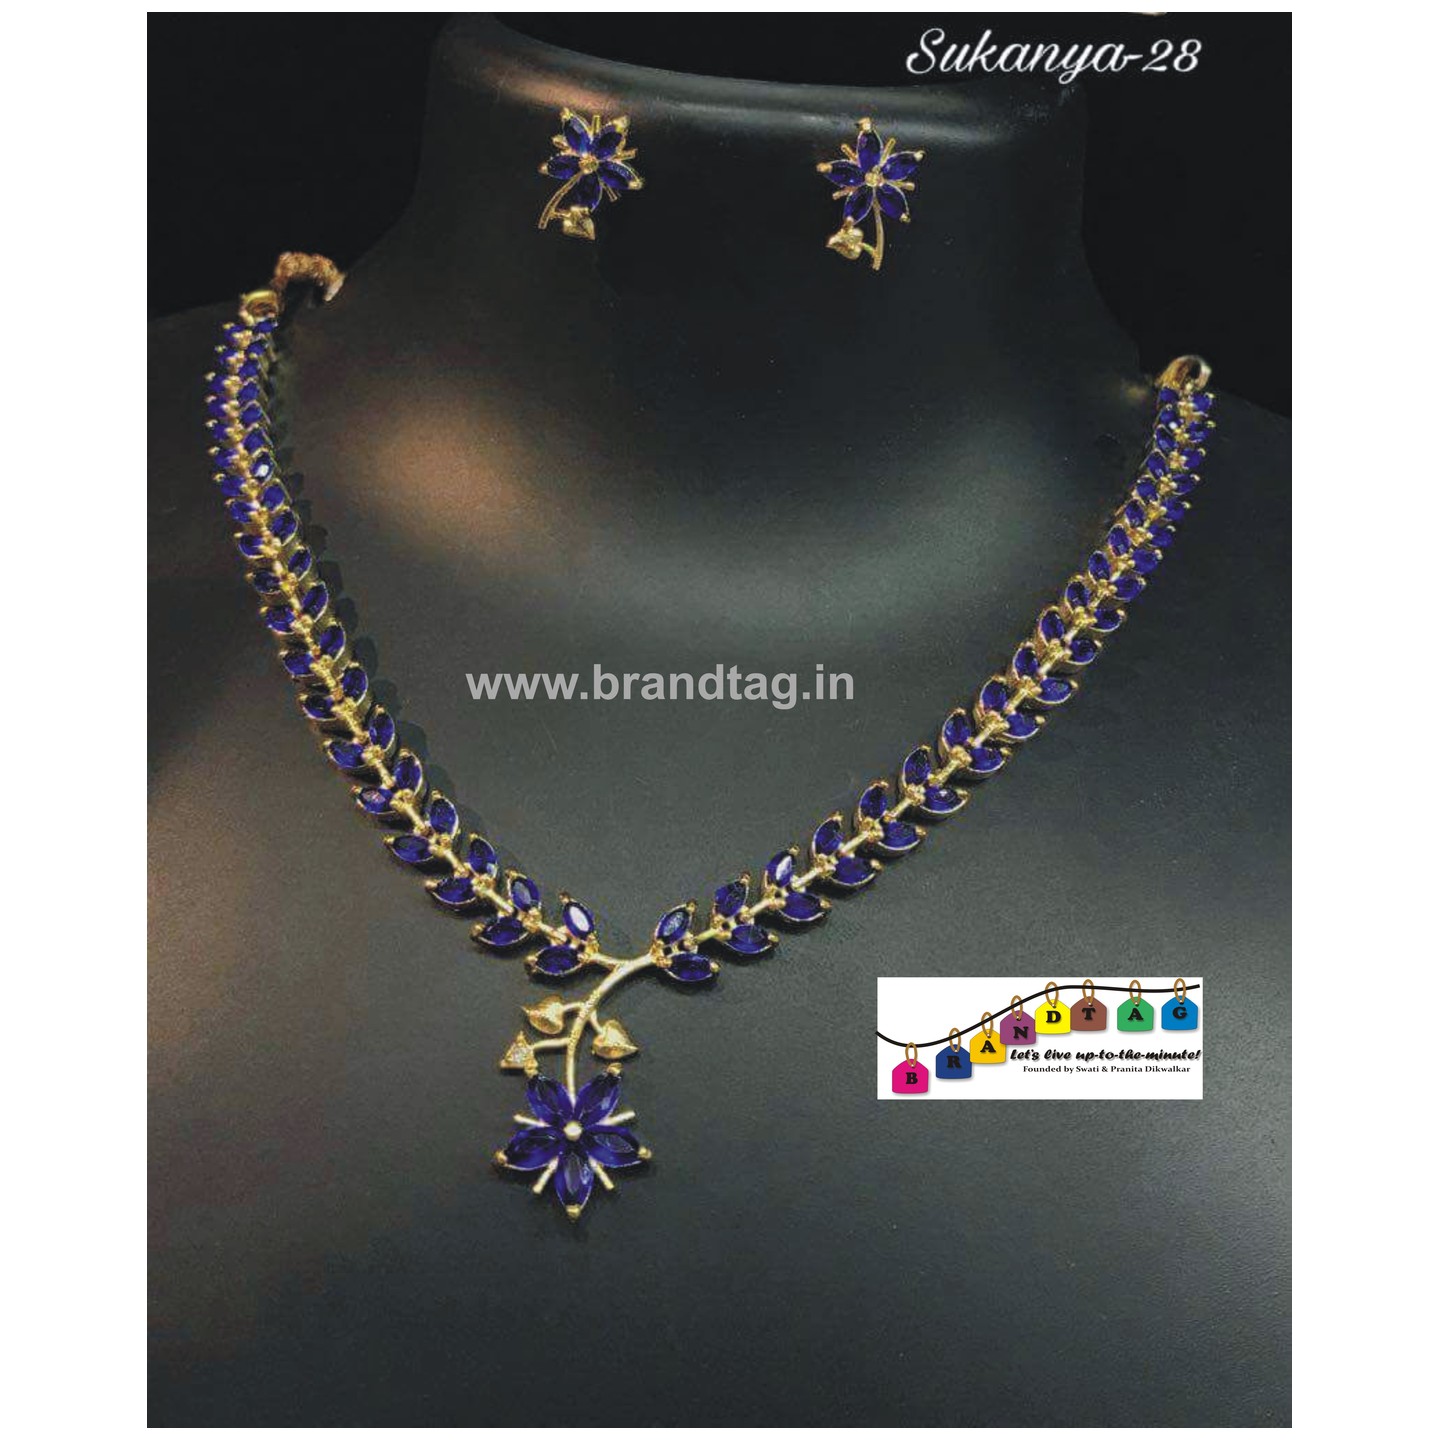 Traditional Yet Contemporary Necklace set!